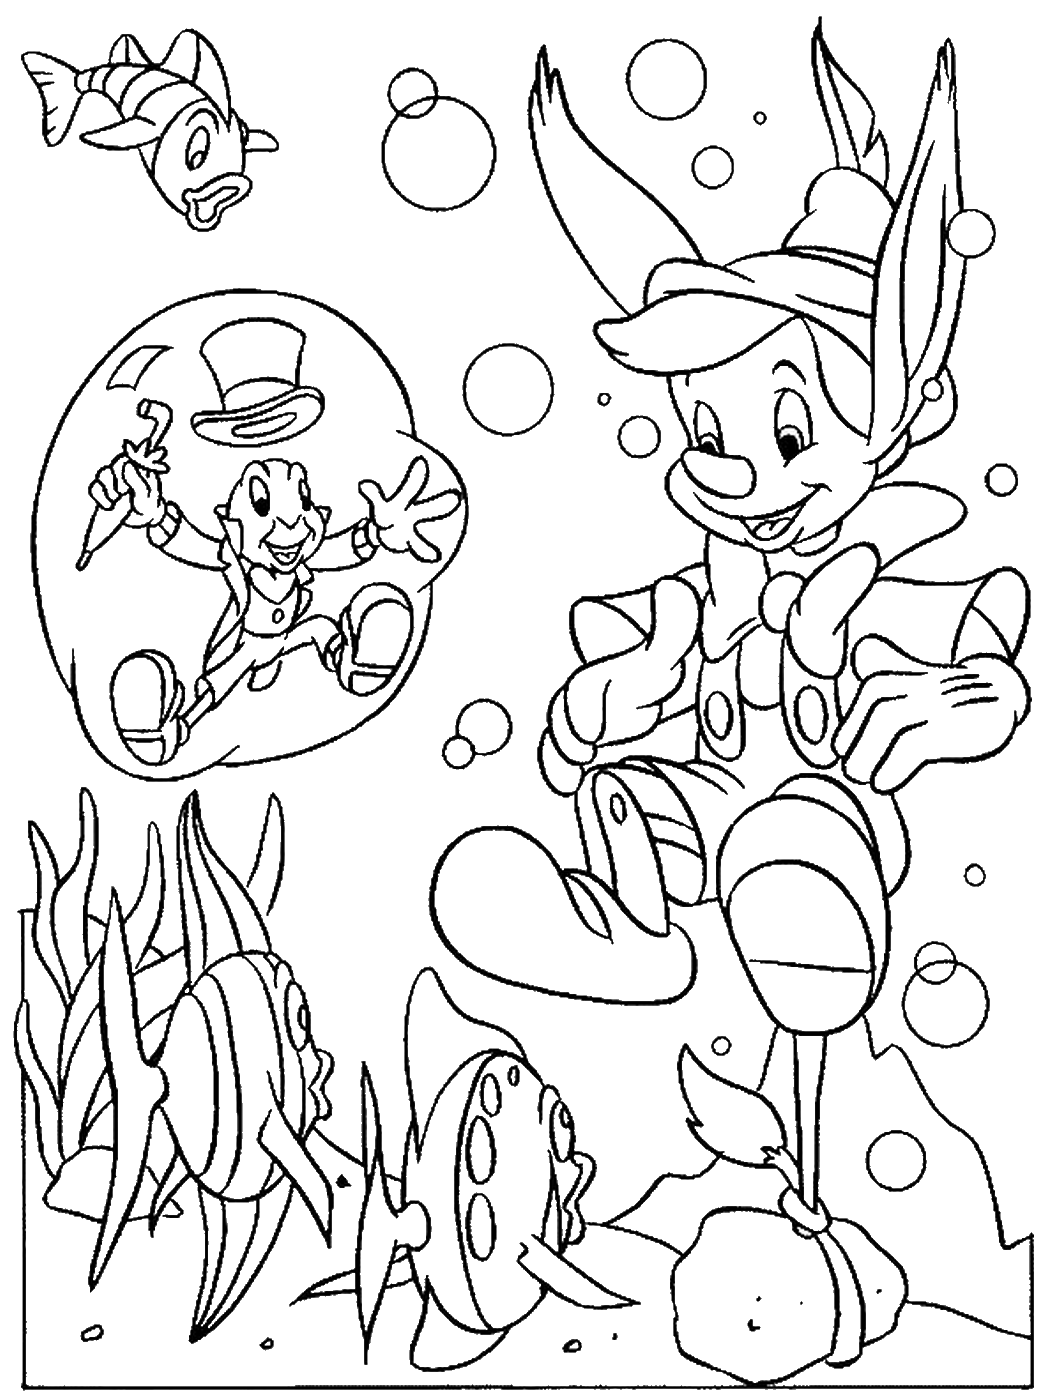 Pinocchio Coloring Pages TV Film Pinocchio_coloring_7 Printable 2020 06337 Coloring4free